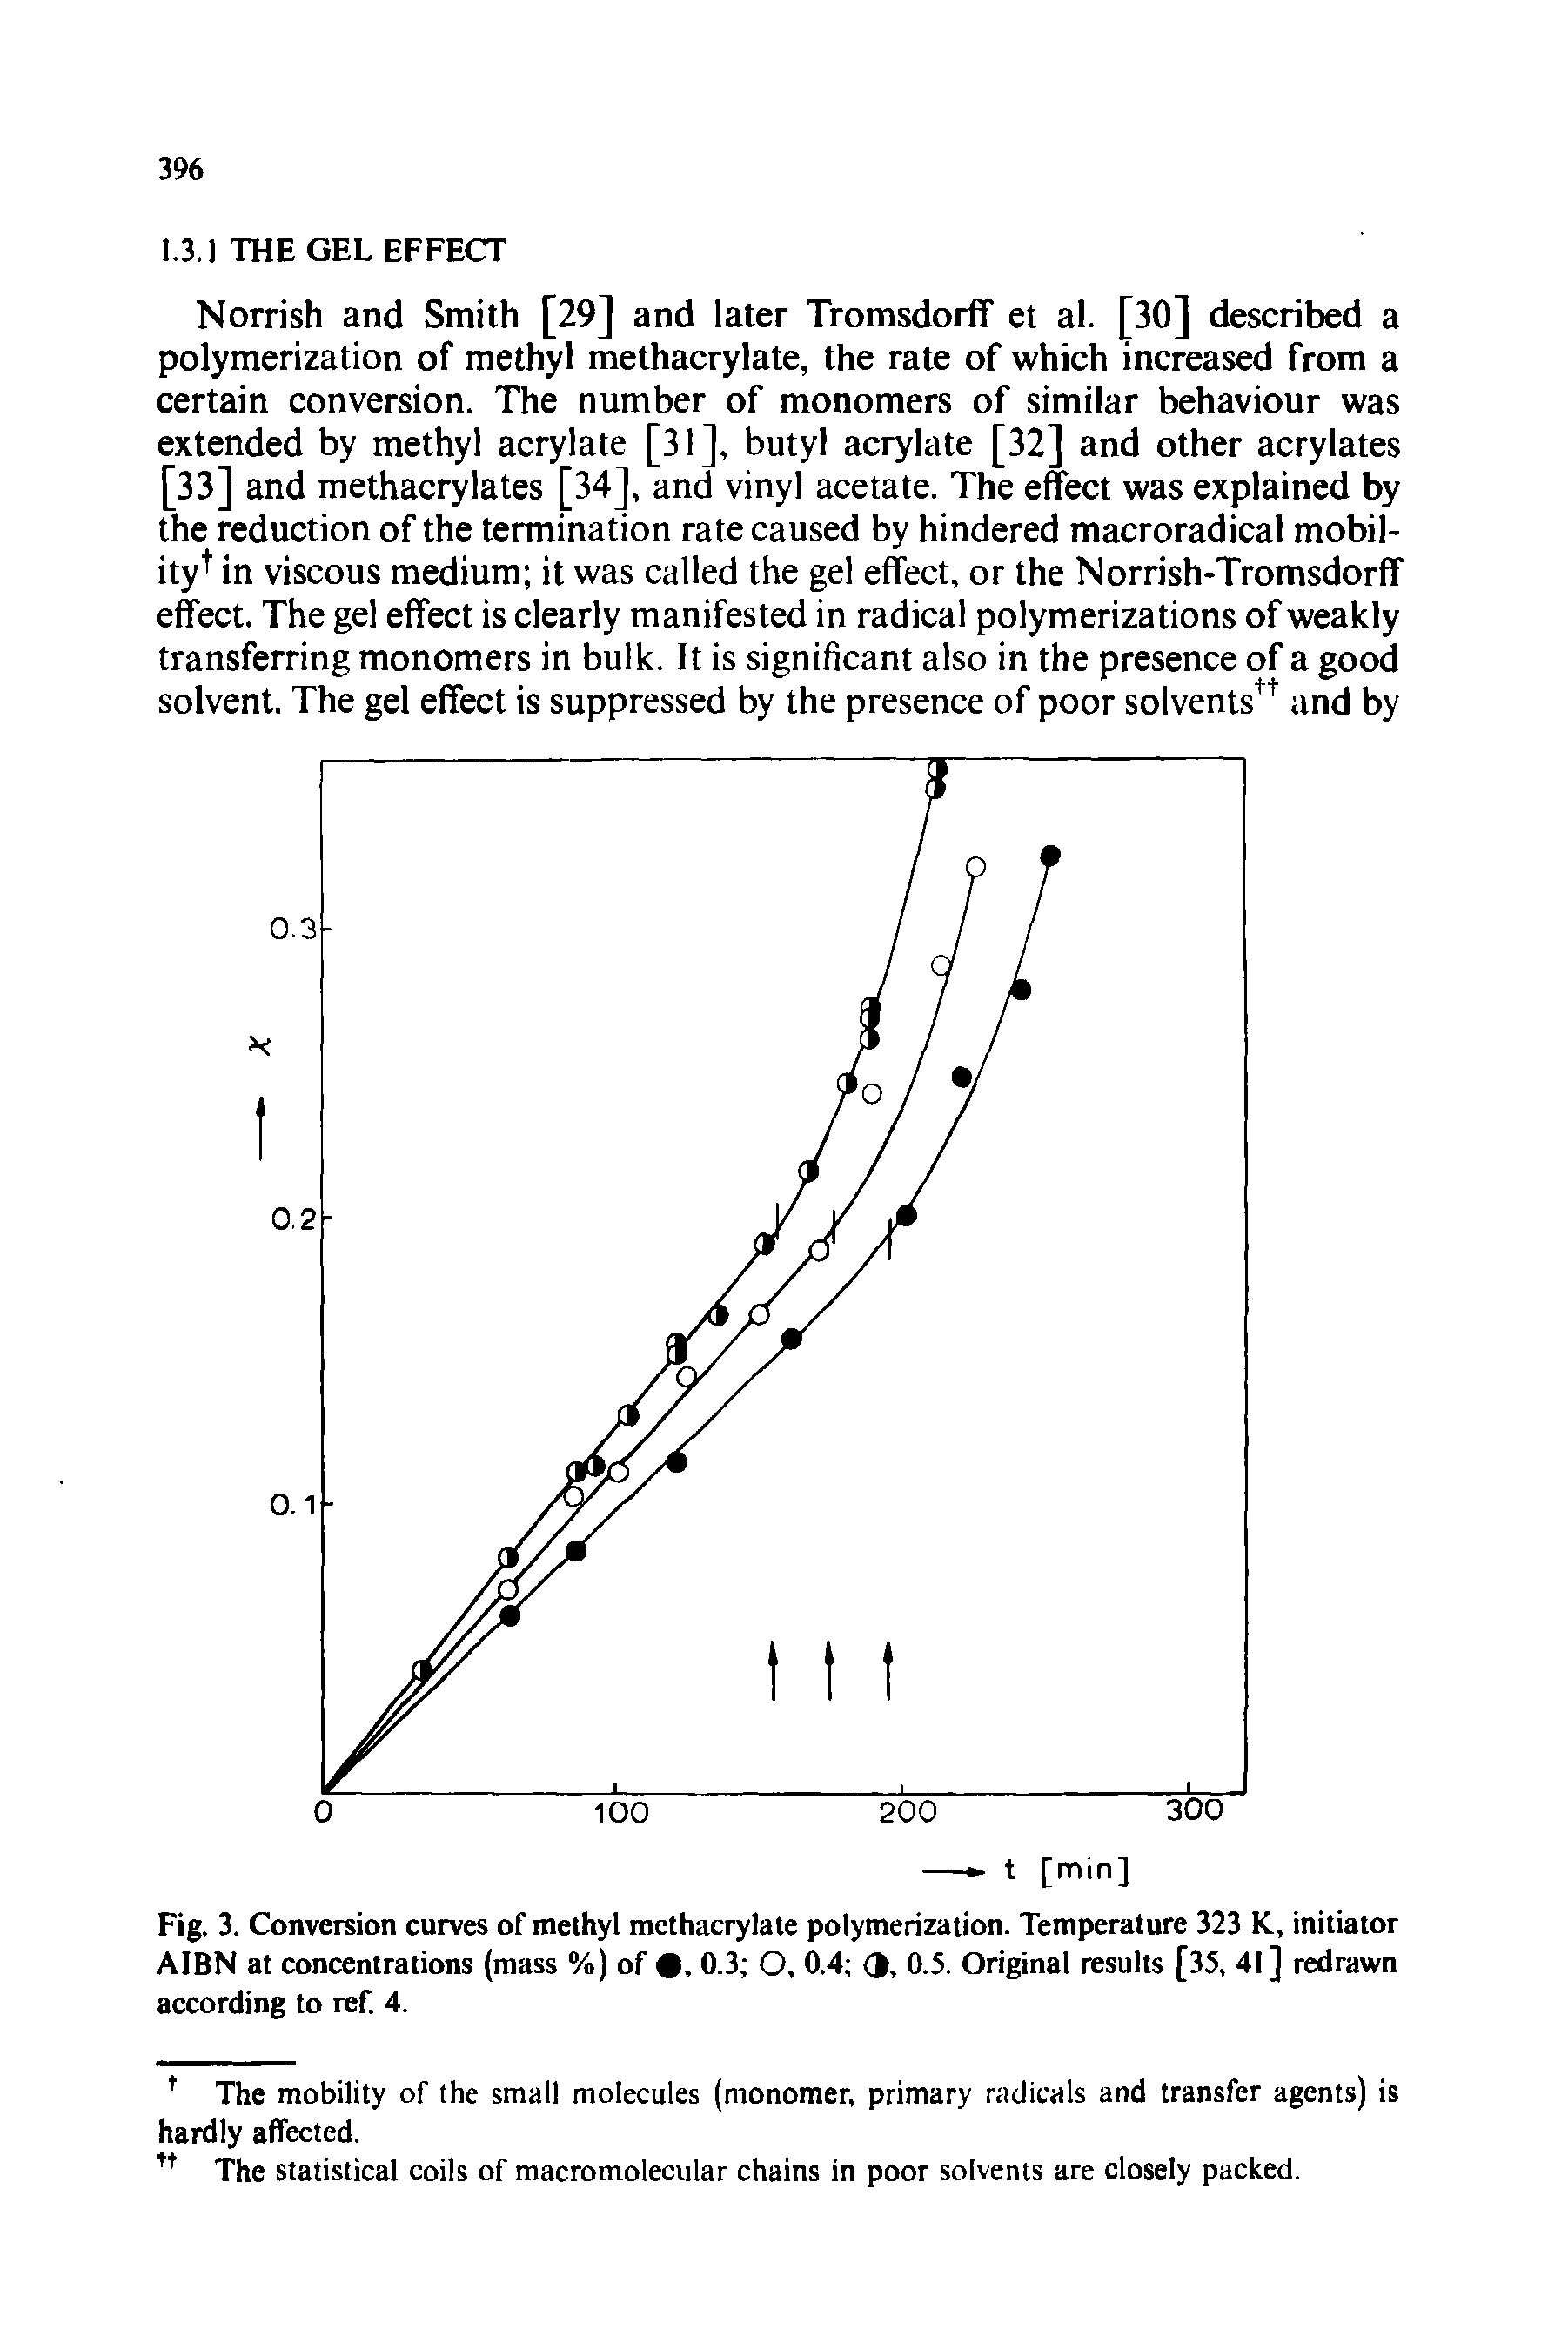 Fig. 3. Conversion curves of methyl methacrylate polymerization. Temperature 323 K., initiator AIBN at concentrations (mass %) of , 0.3 O, 0.4 Q, 0.5. Original results [35, 41] redrawn according to ref. 4.